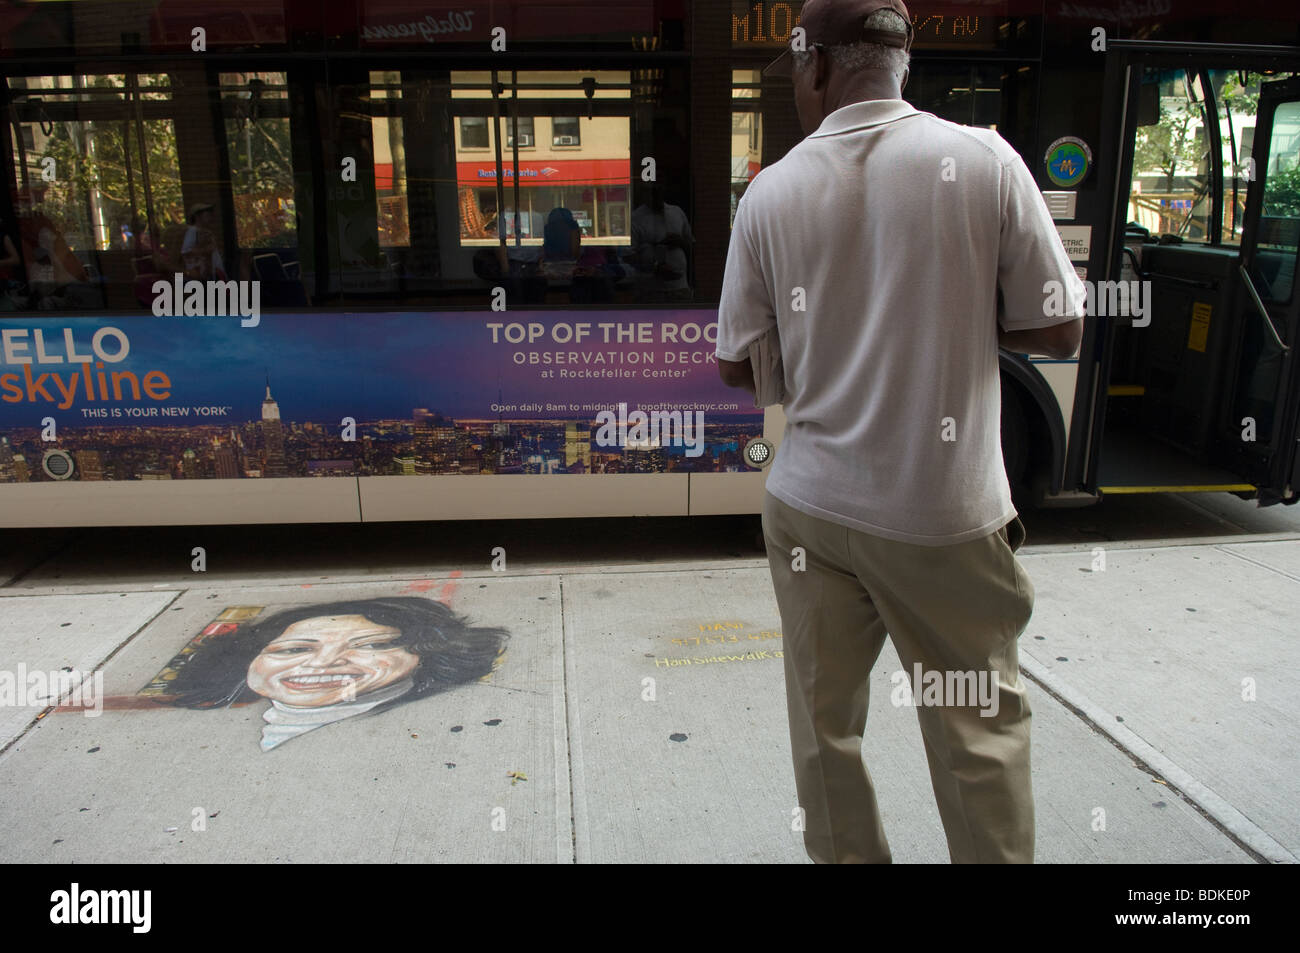 A portrait of Supreme Court Justice Sonia Sotomayor is seen on the sidewalk in New York Stock Photo